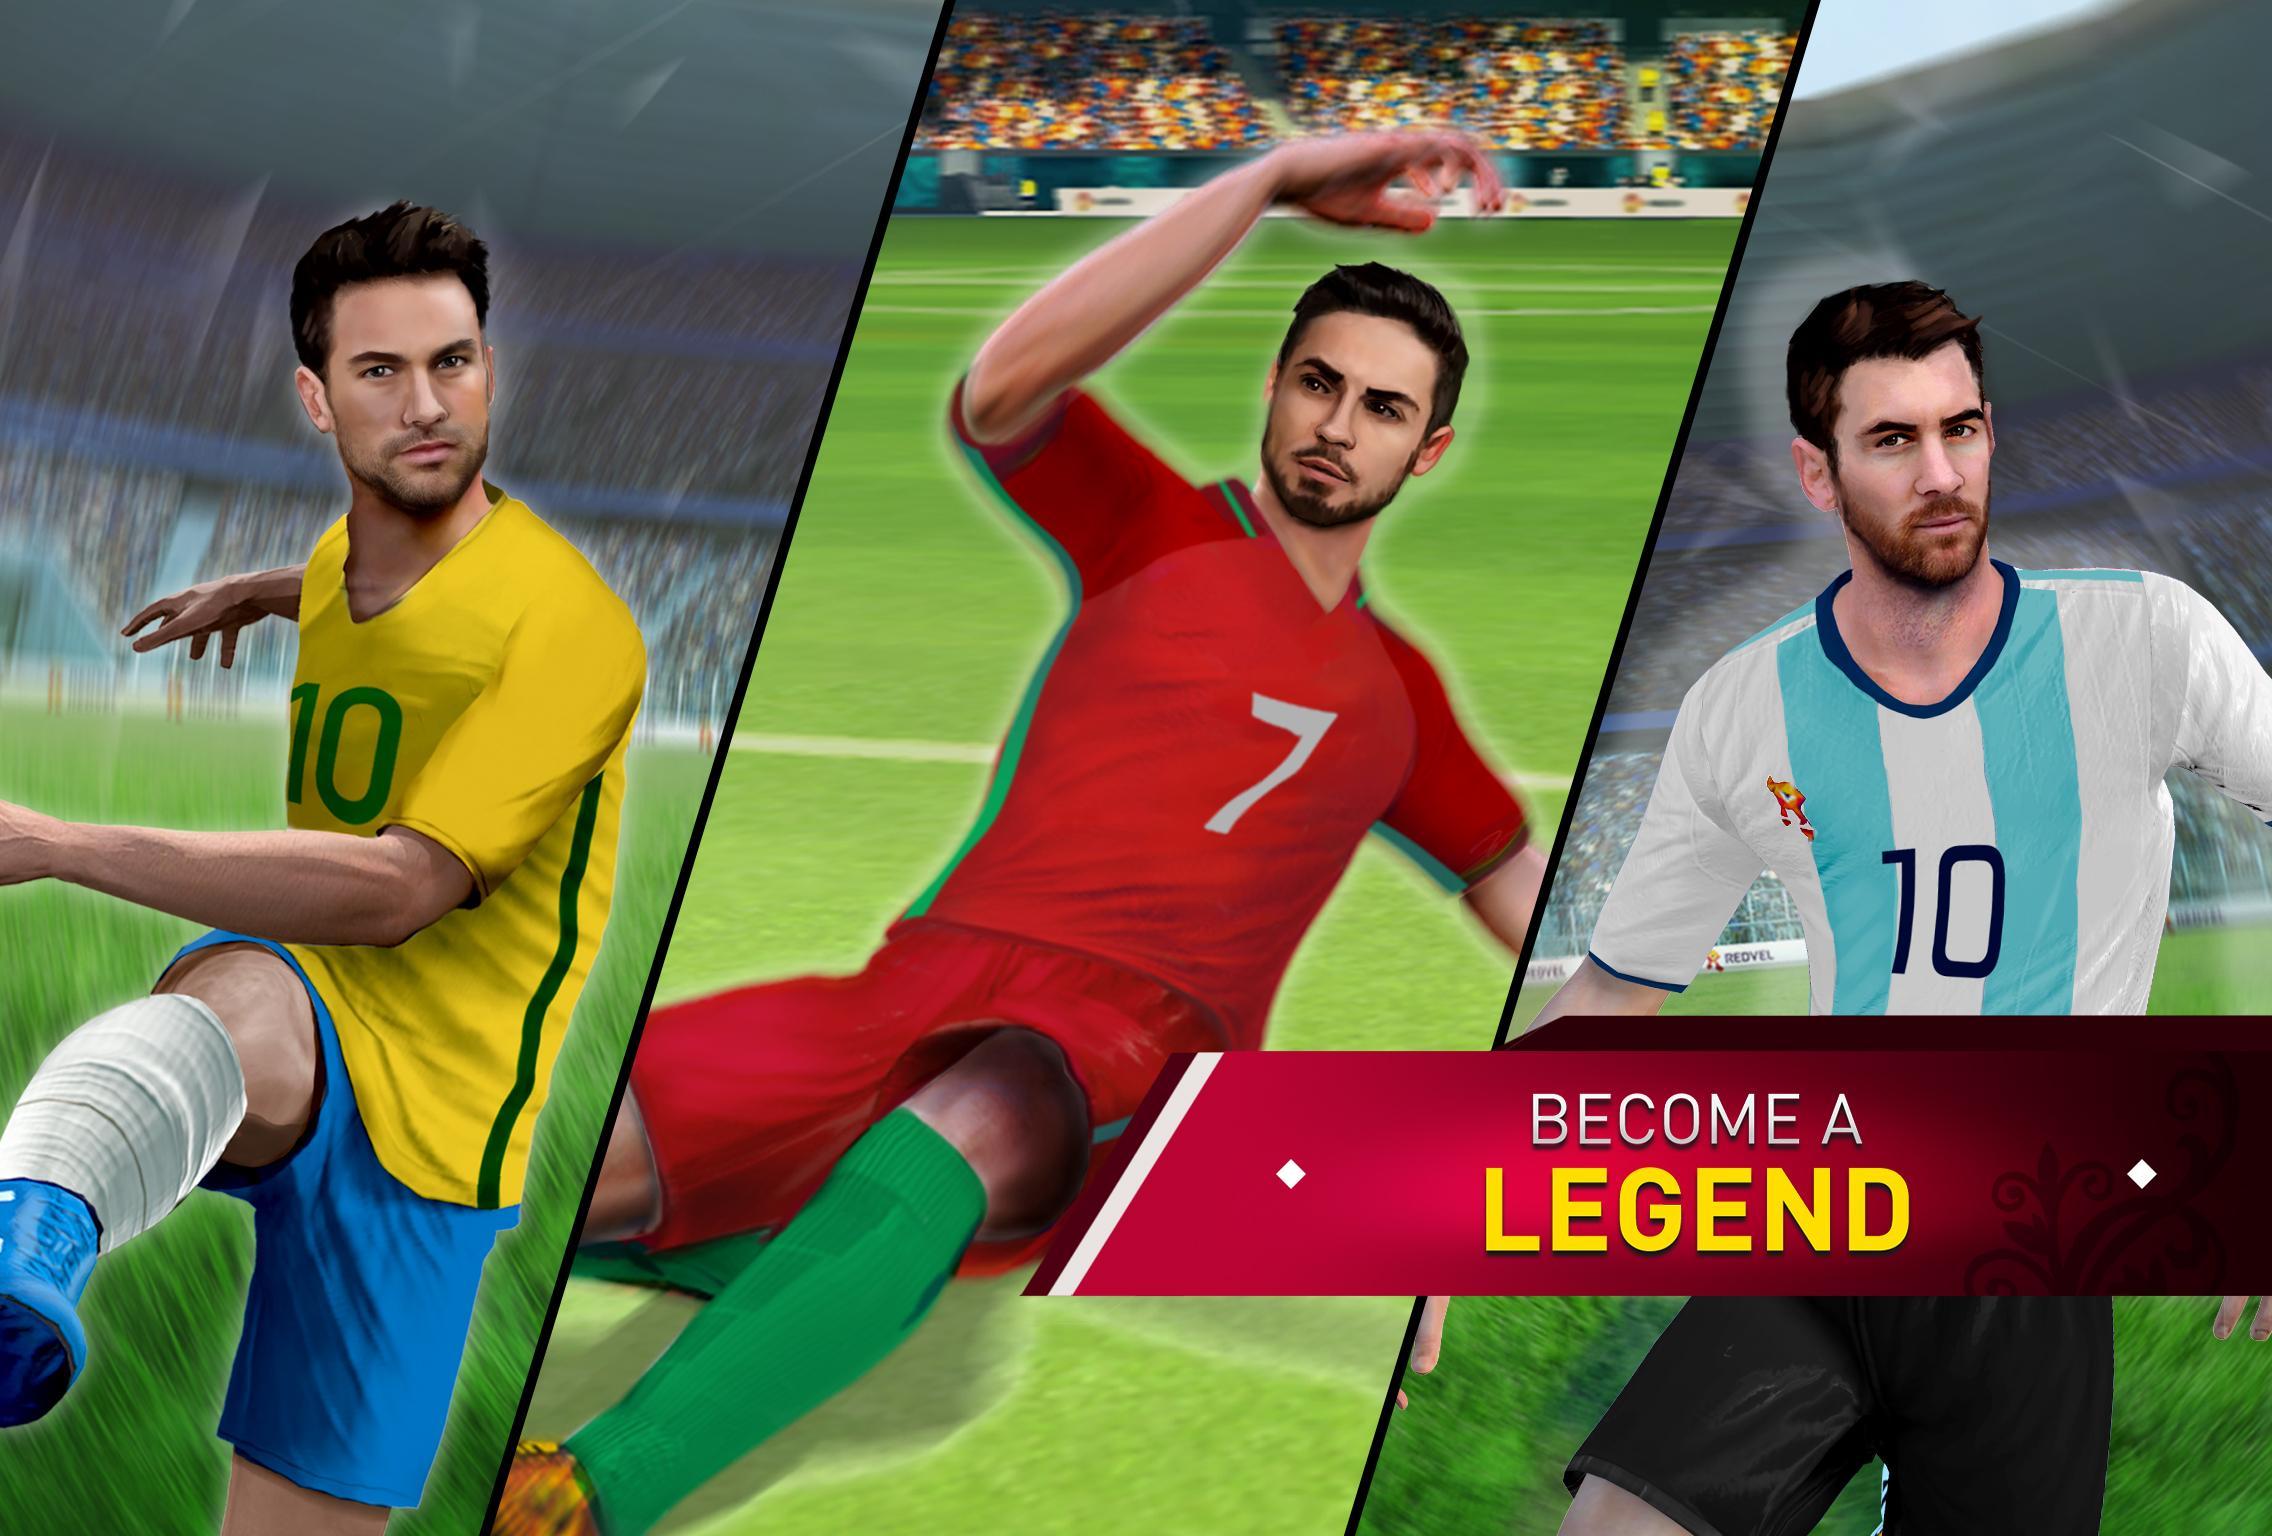 Soccer Star 2017 World Legend APK Download - Free Sports GAME for Android |  APKPure.com